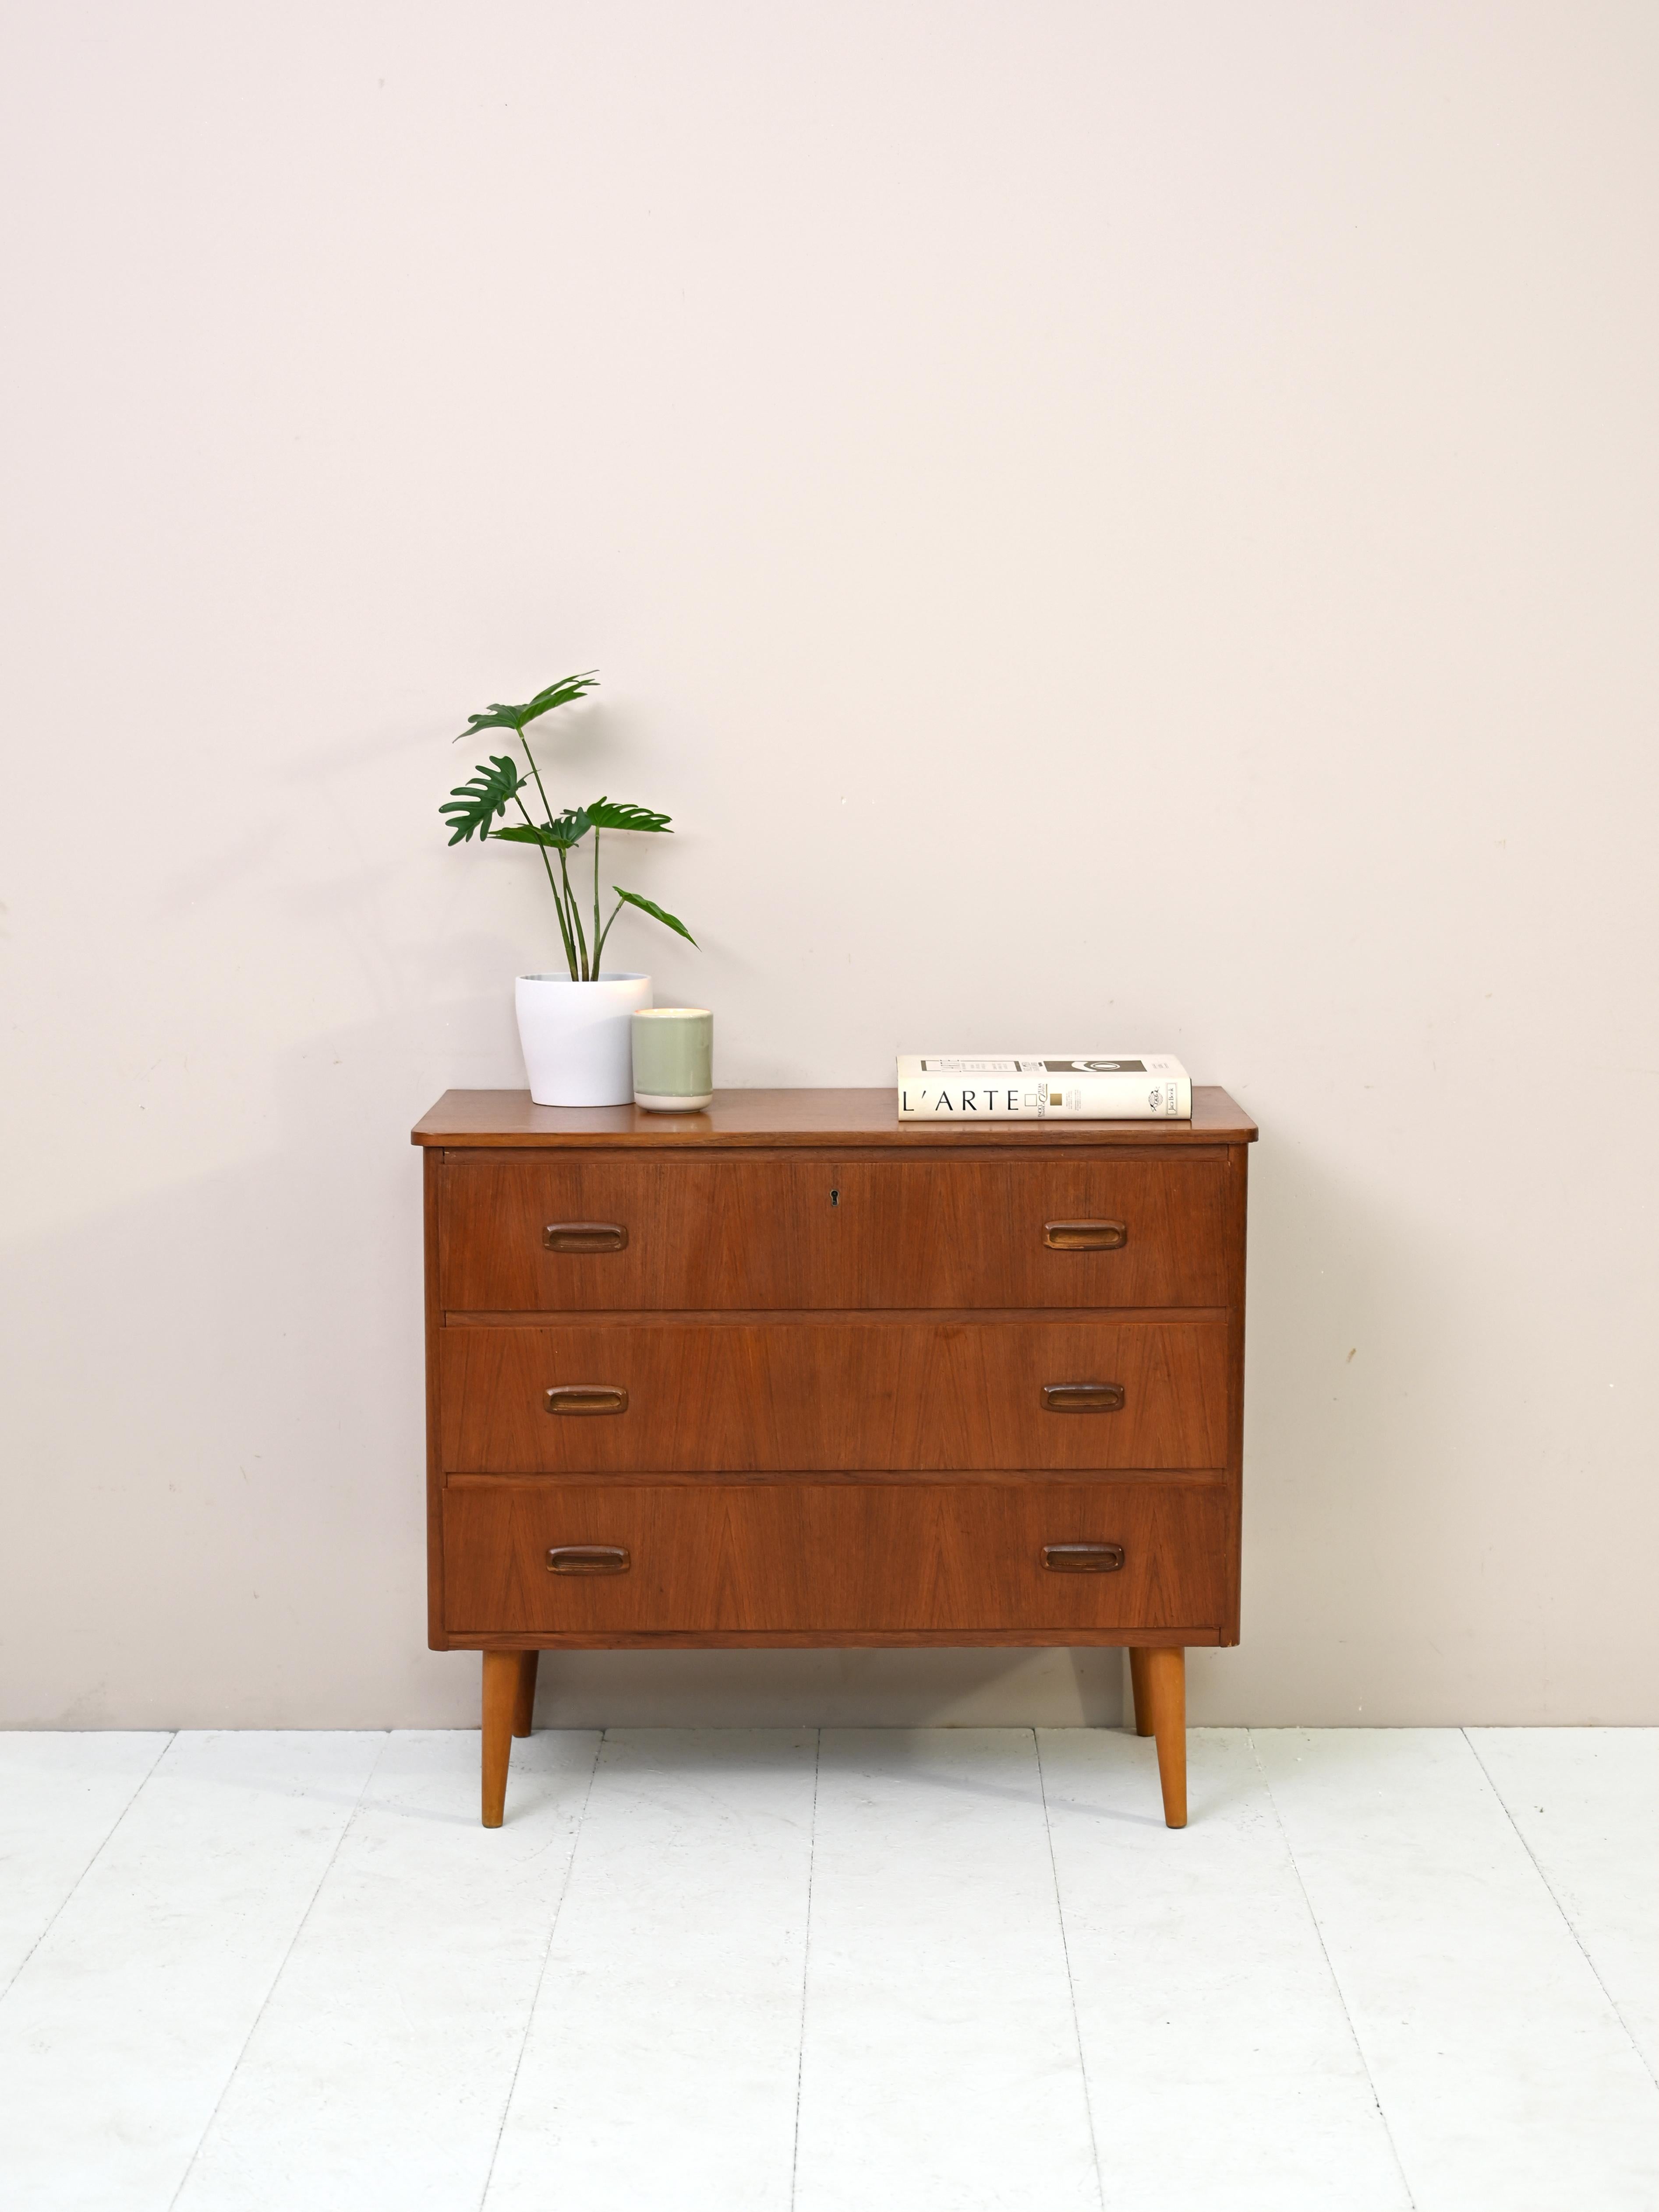 Furniture of Nordic manufacture from the 1960s.
This small chest of drawers features three drawers, the first of which has a lock.
The carved wooden handle is typical of Scandinavian design of the time.
The light oak conical legs give a modern